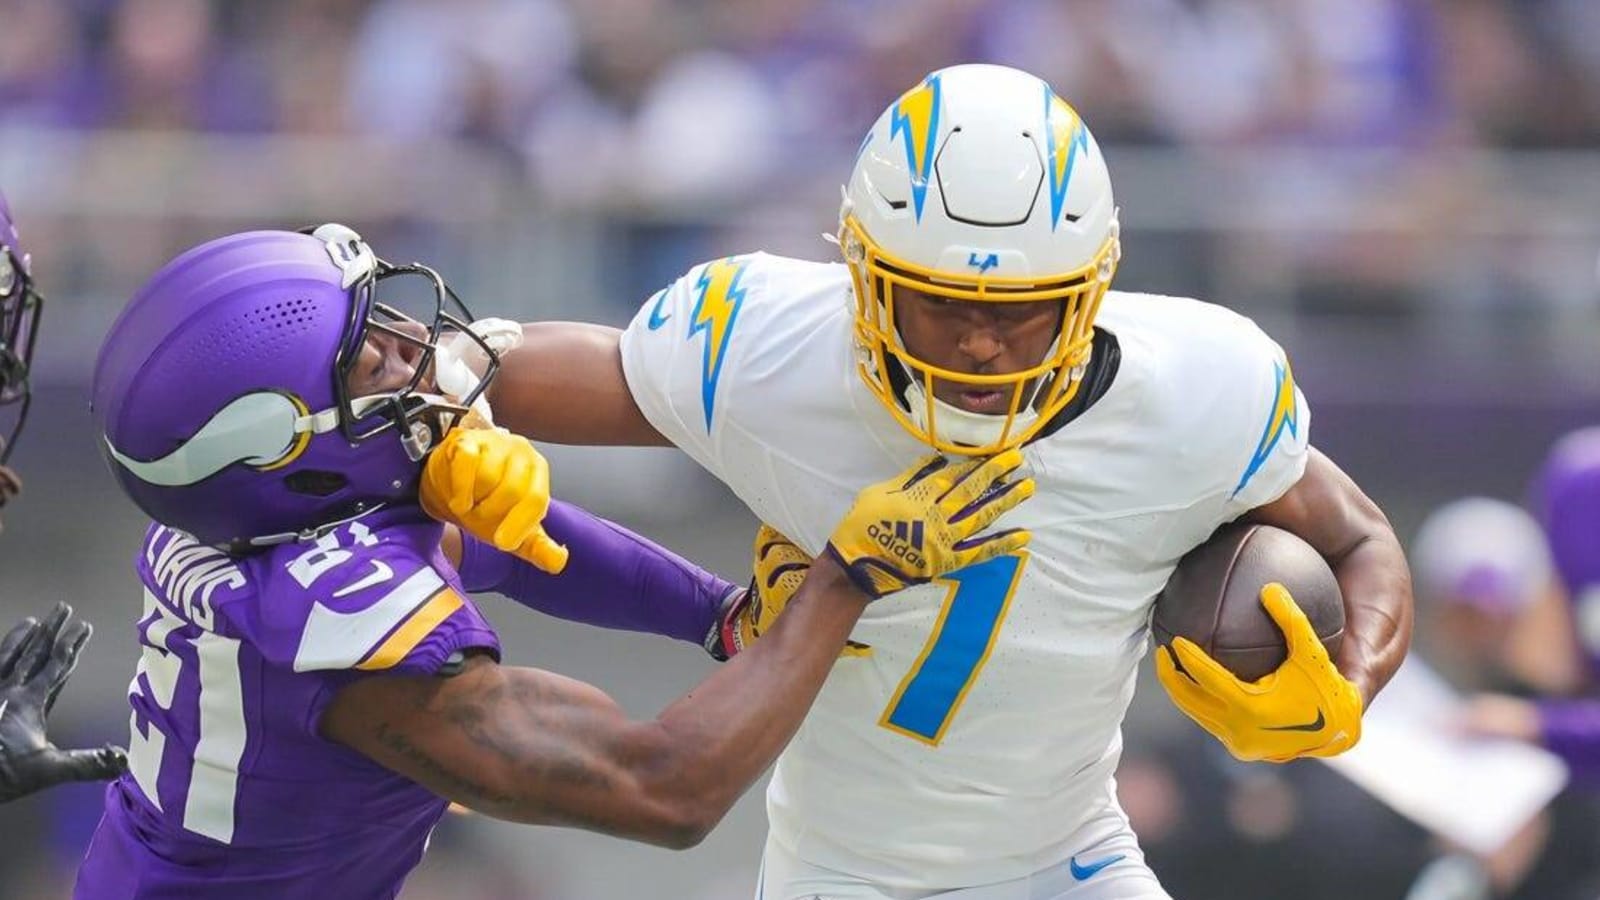 Chargers survive cliff-hanger with Vikings on end zone pick